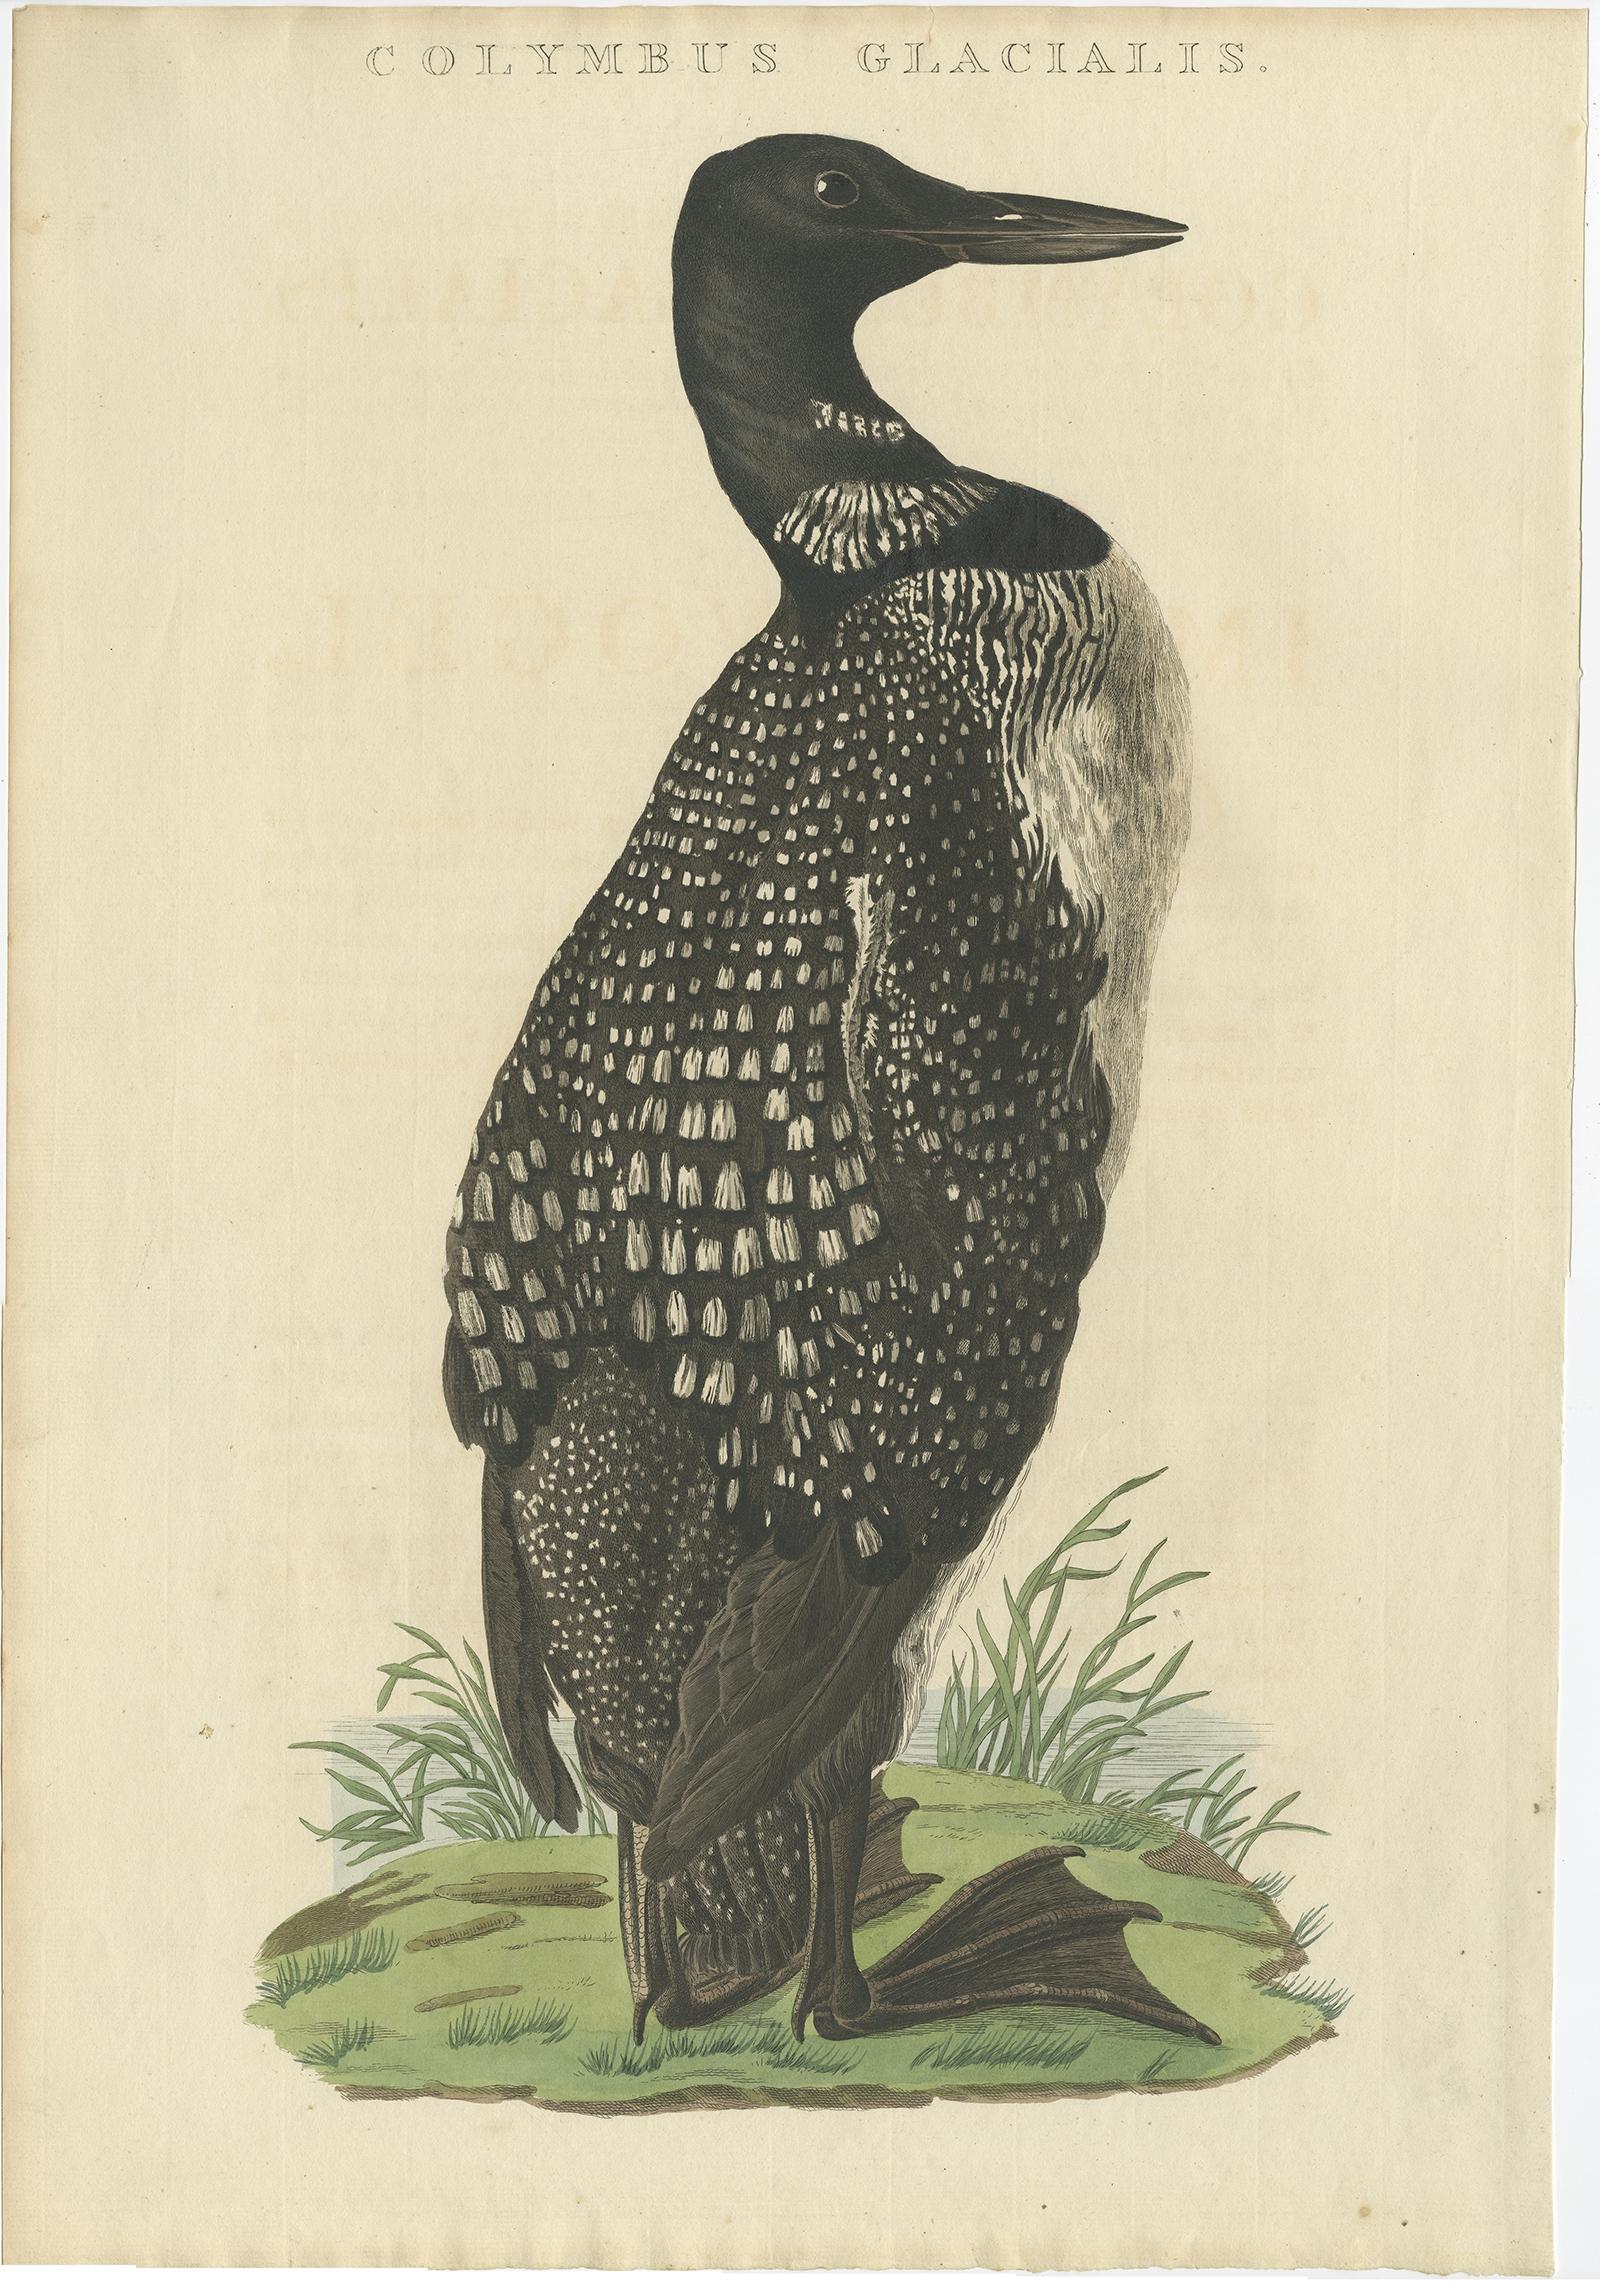 Antique print titled 'Colymbus Glacialis'. 

This print depicts the common loon (Dutch: ijsduiker). The common loon or great northern diver (Gavia immer) is a large member of the loon, or diver, family of birds. Breeding adults have a plumage that